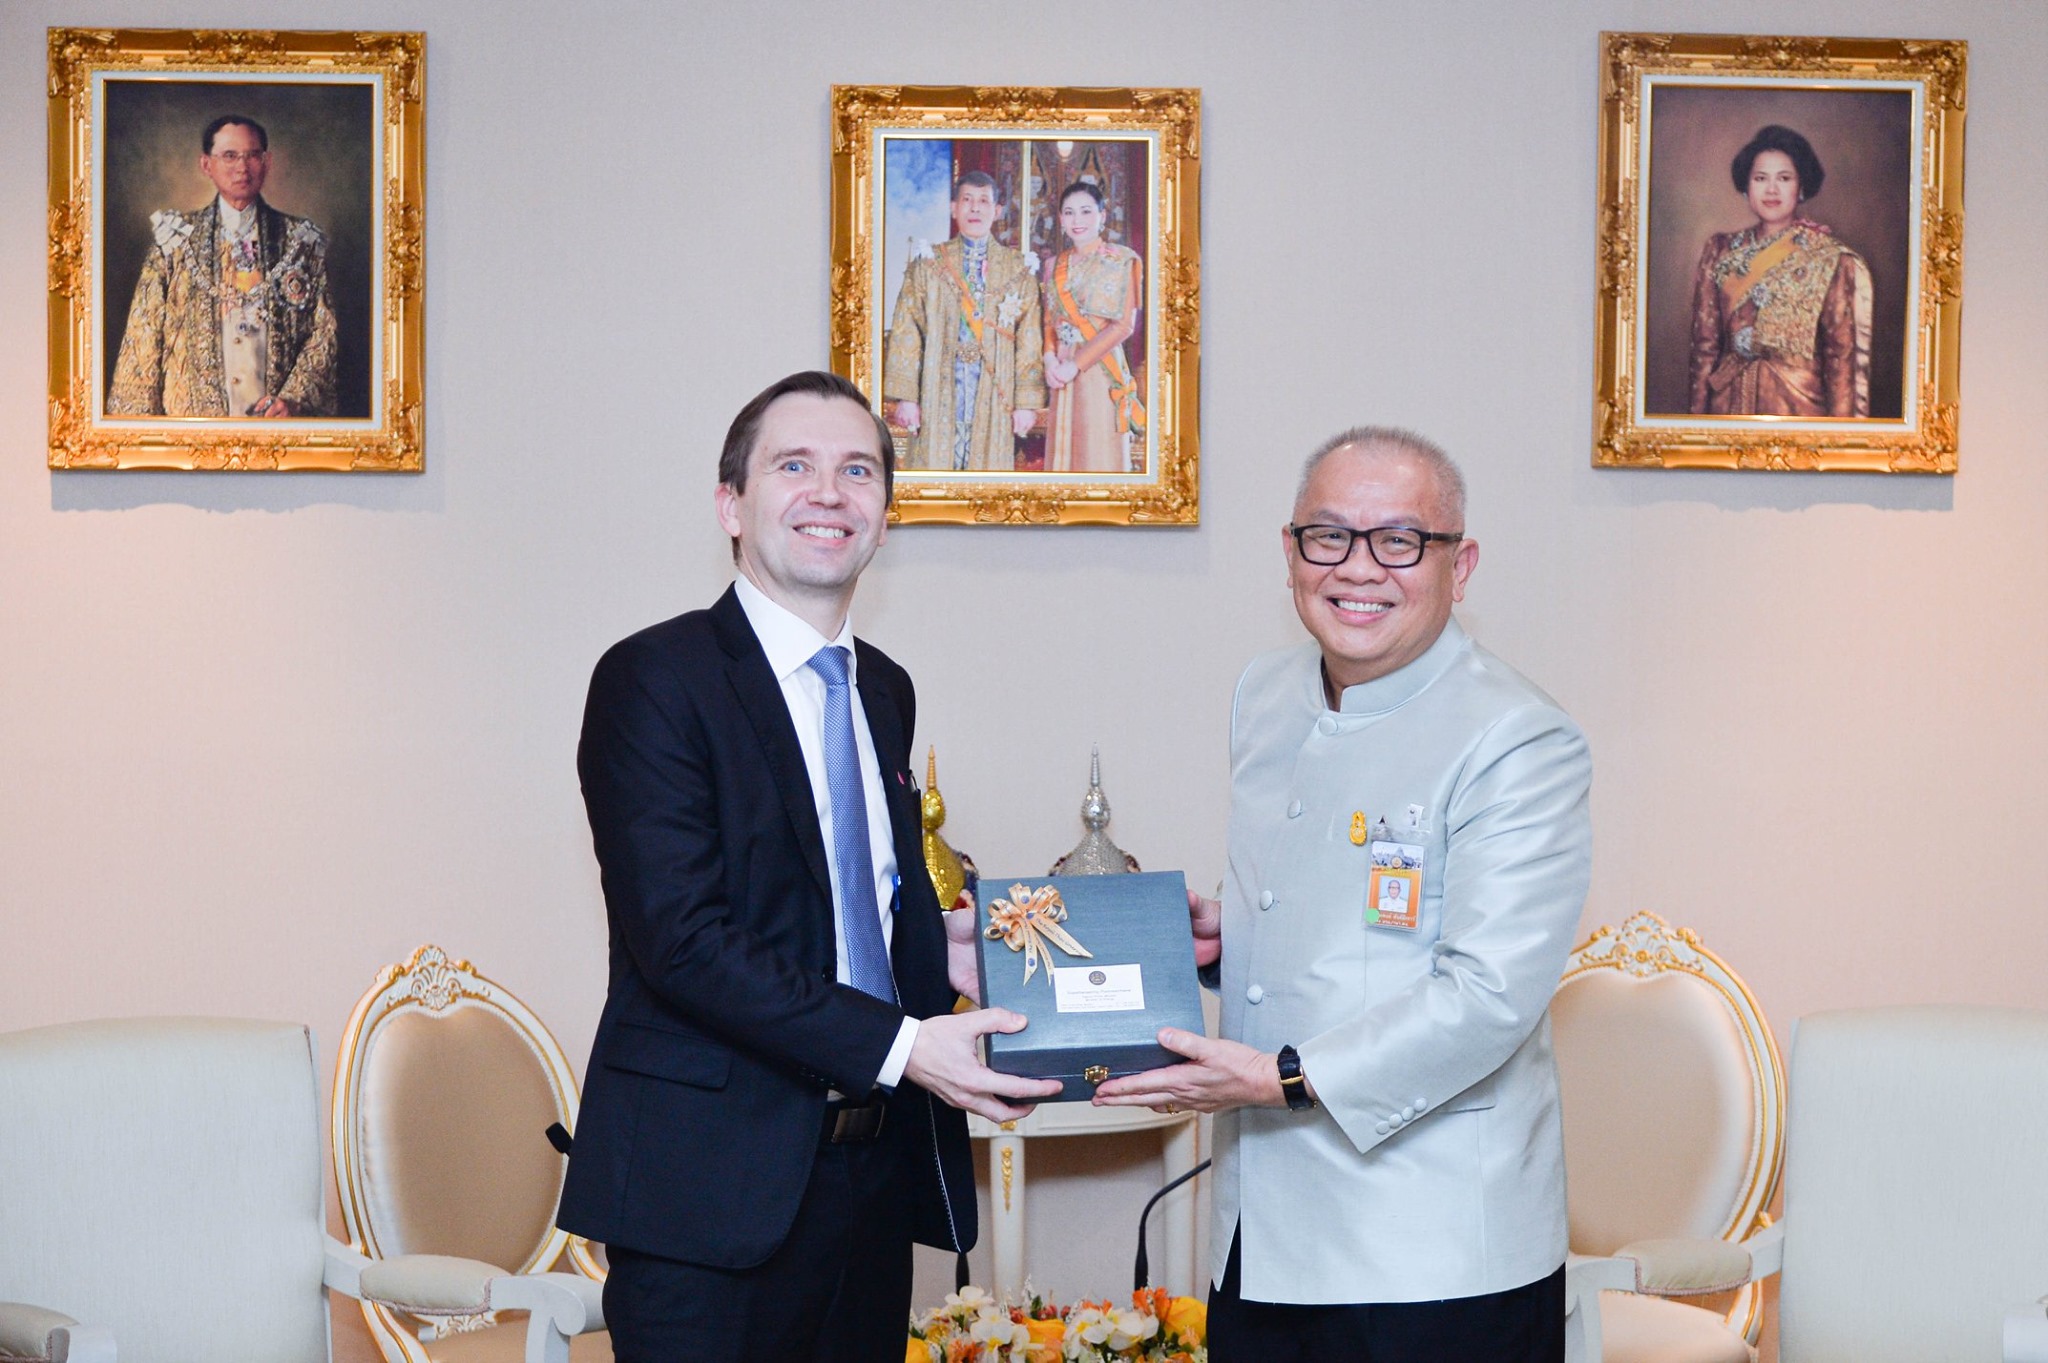 Ambassador Thorgaard and team visited Thailand's Minister of Energy and Deputy Prime Minister